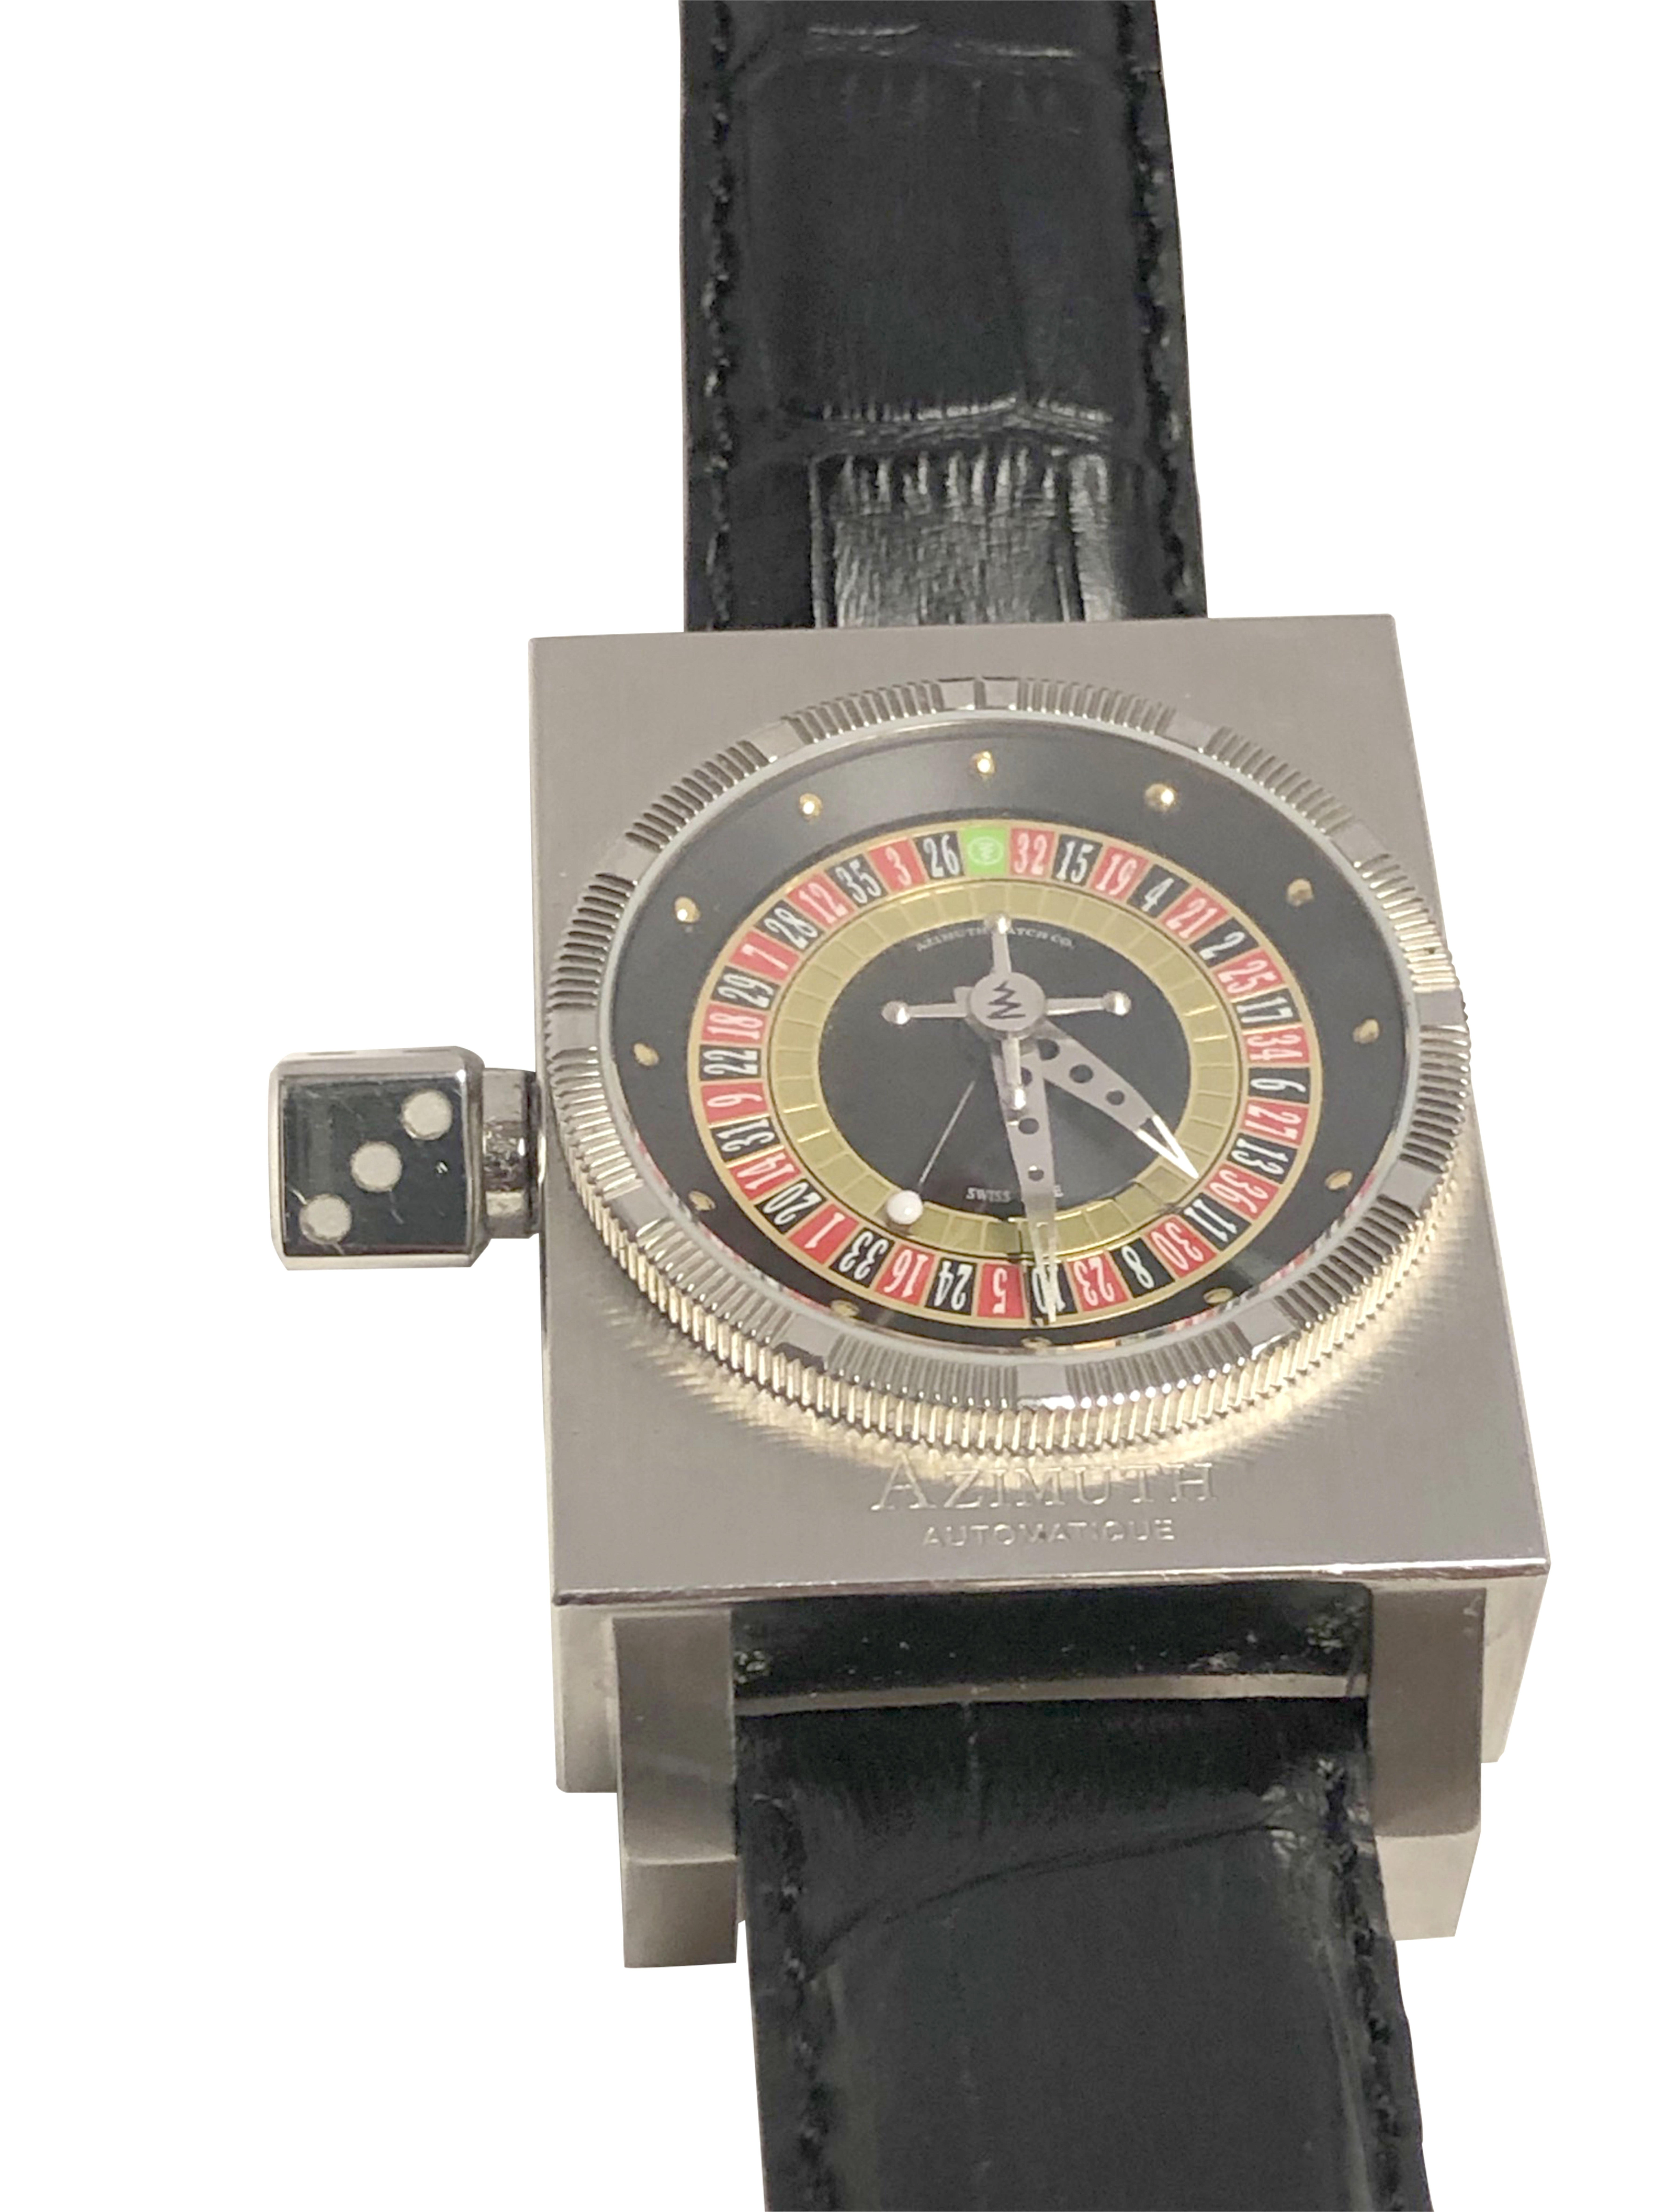 Circa 2010 Azimuth SP 1 Roulette Wrist Watch, 56 X 35 X 12 M.M Stainless Steel Water resistant case, Automatic, Self Winding movement, Sapphire Glass crystal and unique Roulette Wheel dial with spinning center element and unique Dice Crown. Original